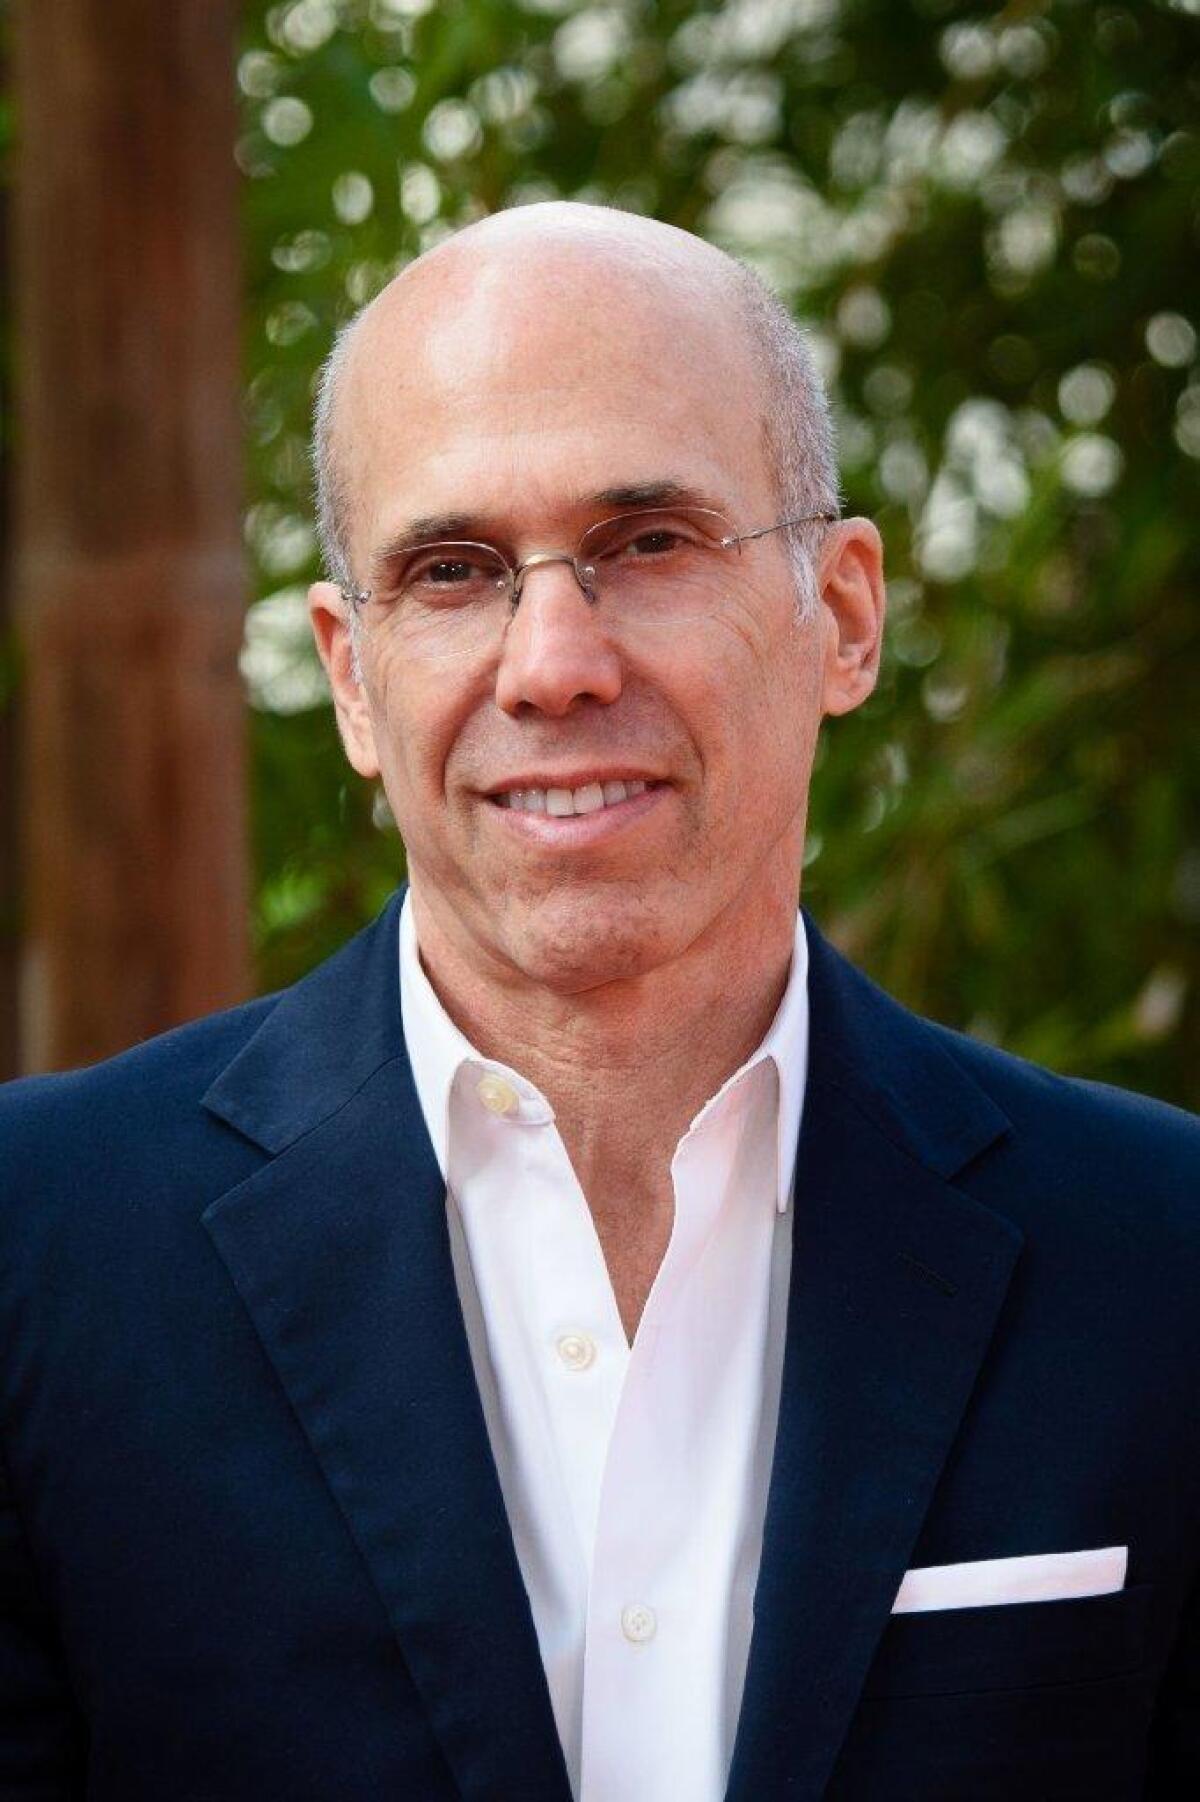 Jeffrey Katzenberg publicly released an email he sent to Harvey Weinstein condemning the producer's behavior.